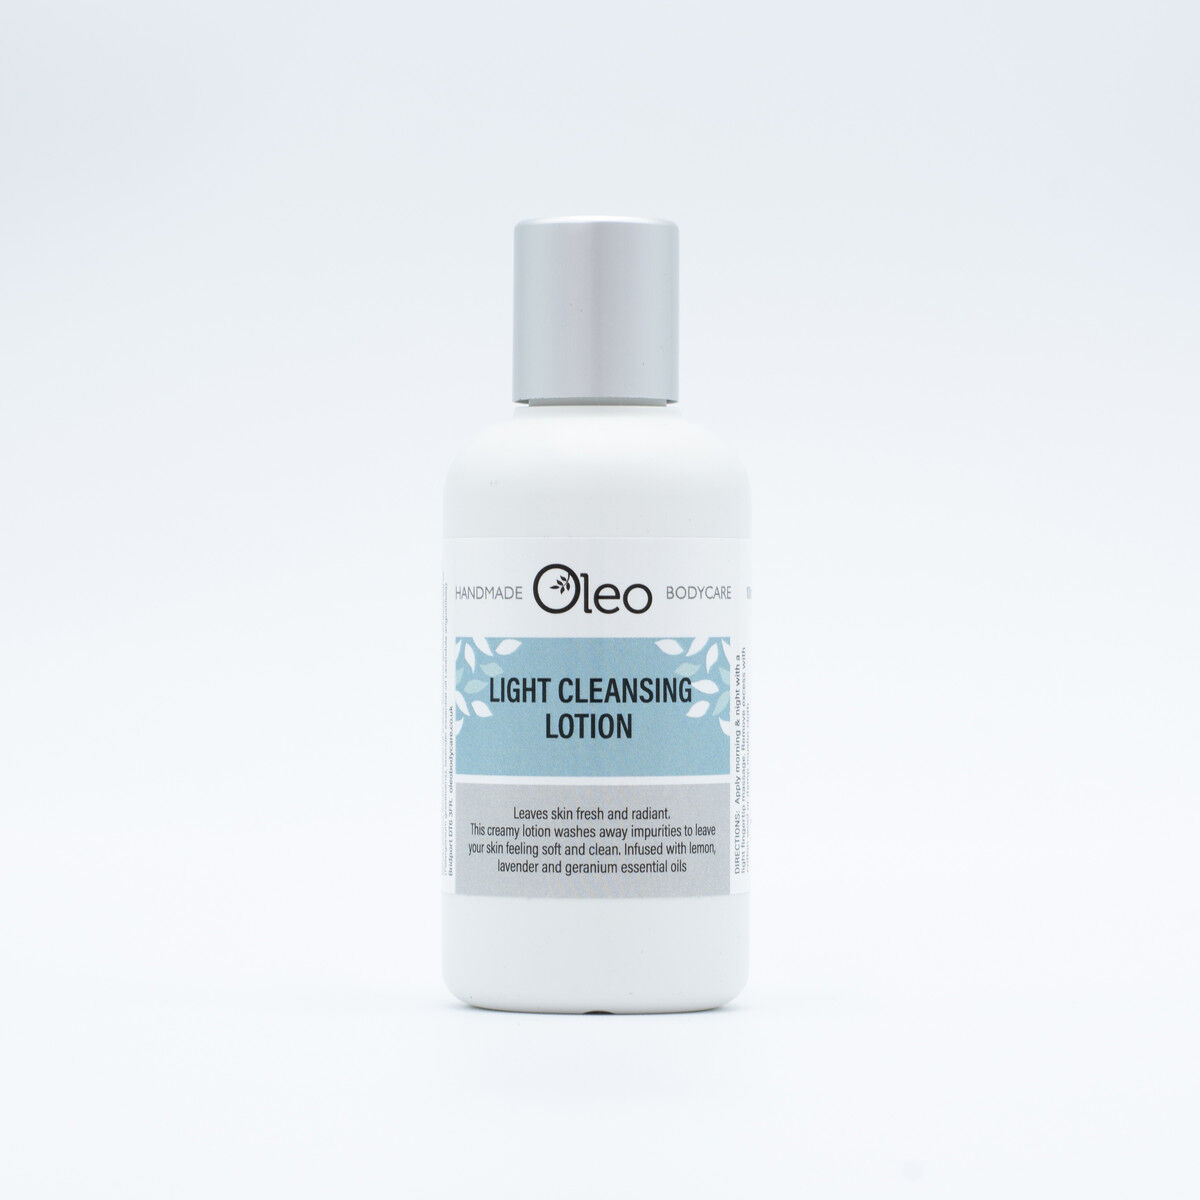 Light Cleansing Lotion